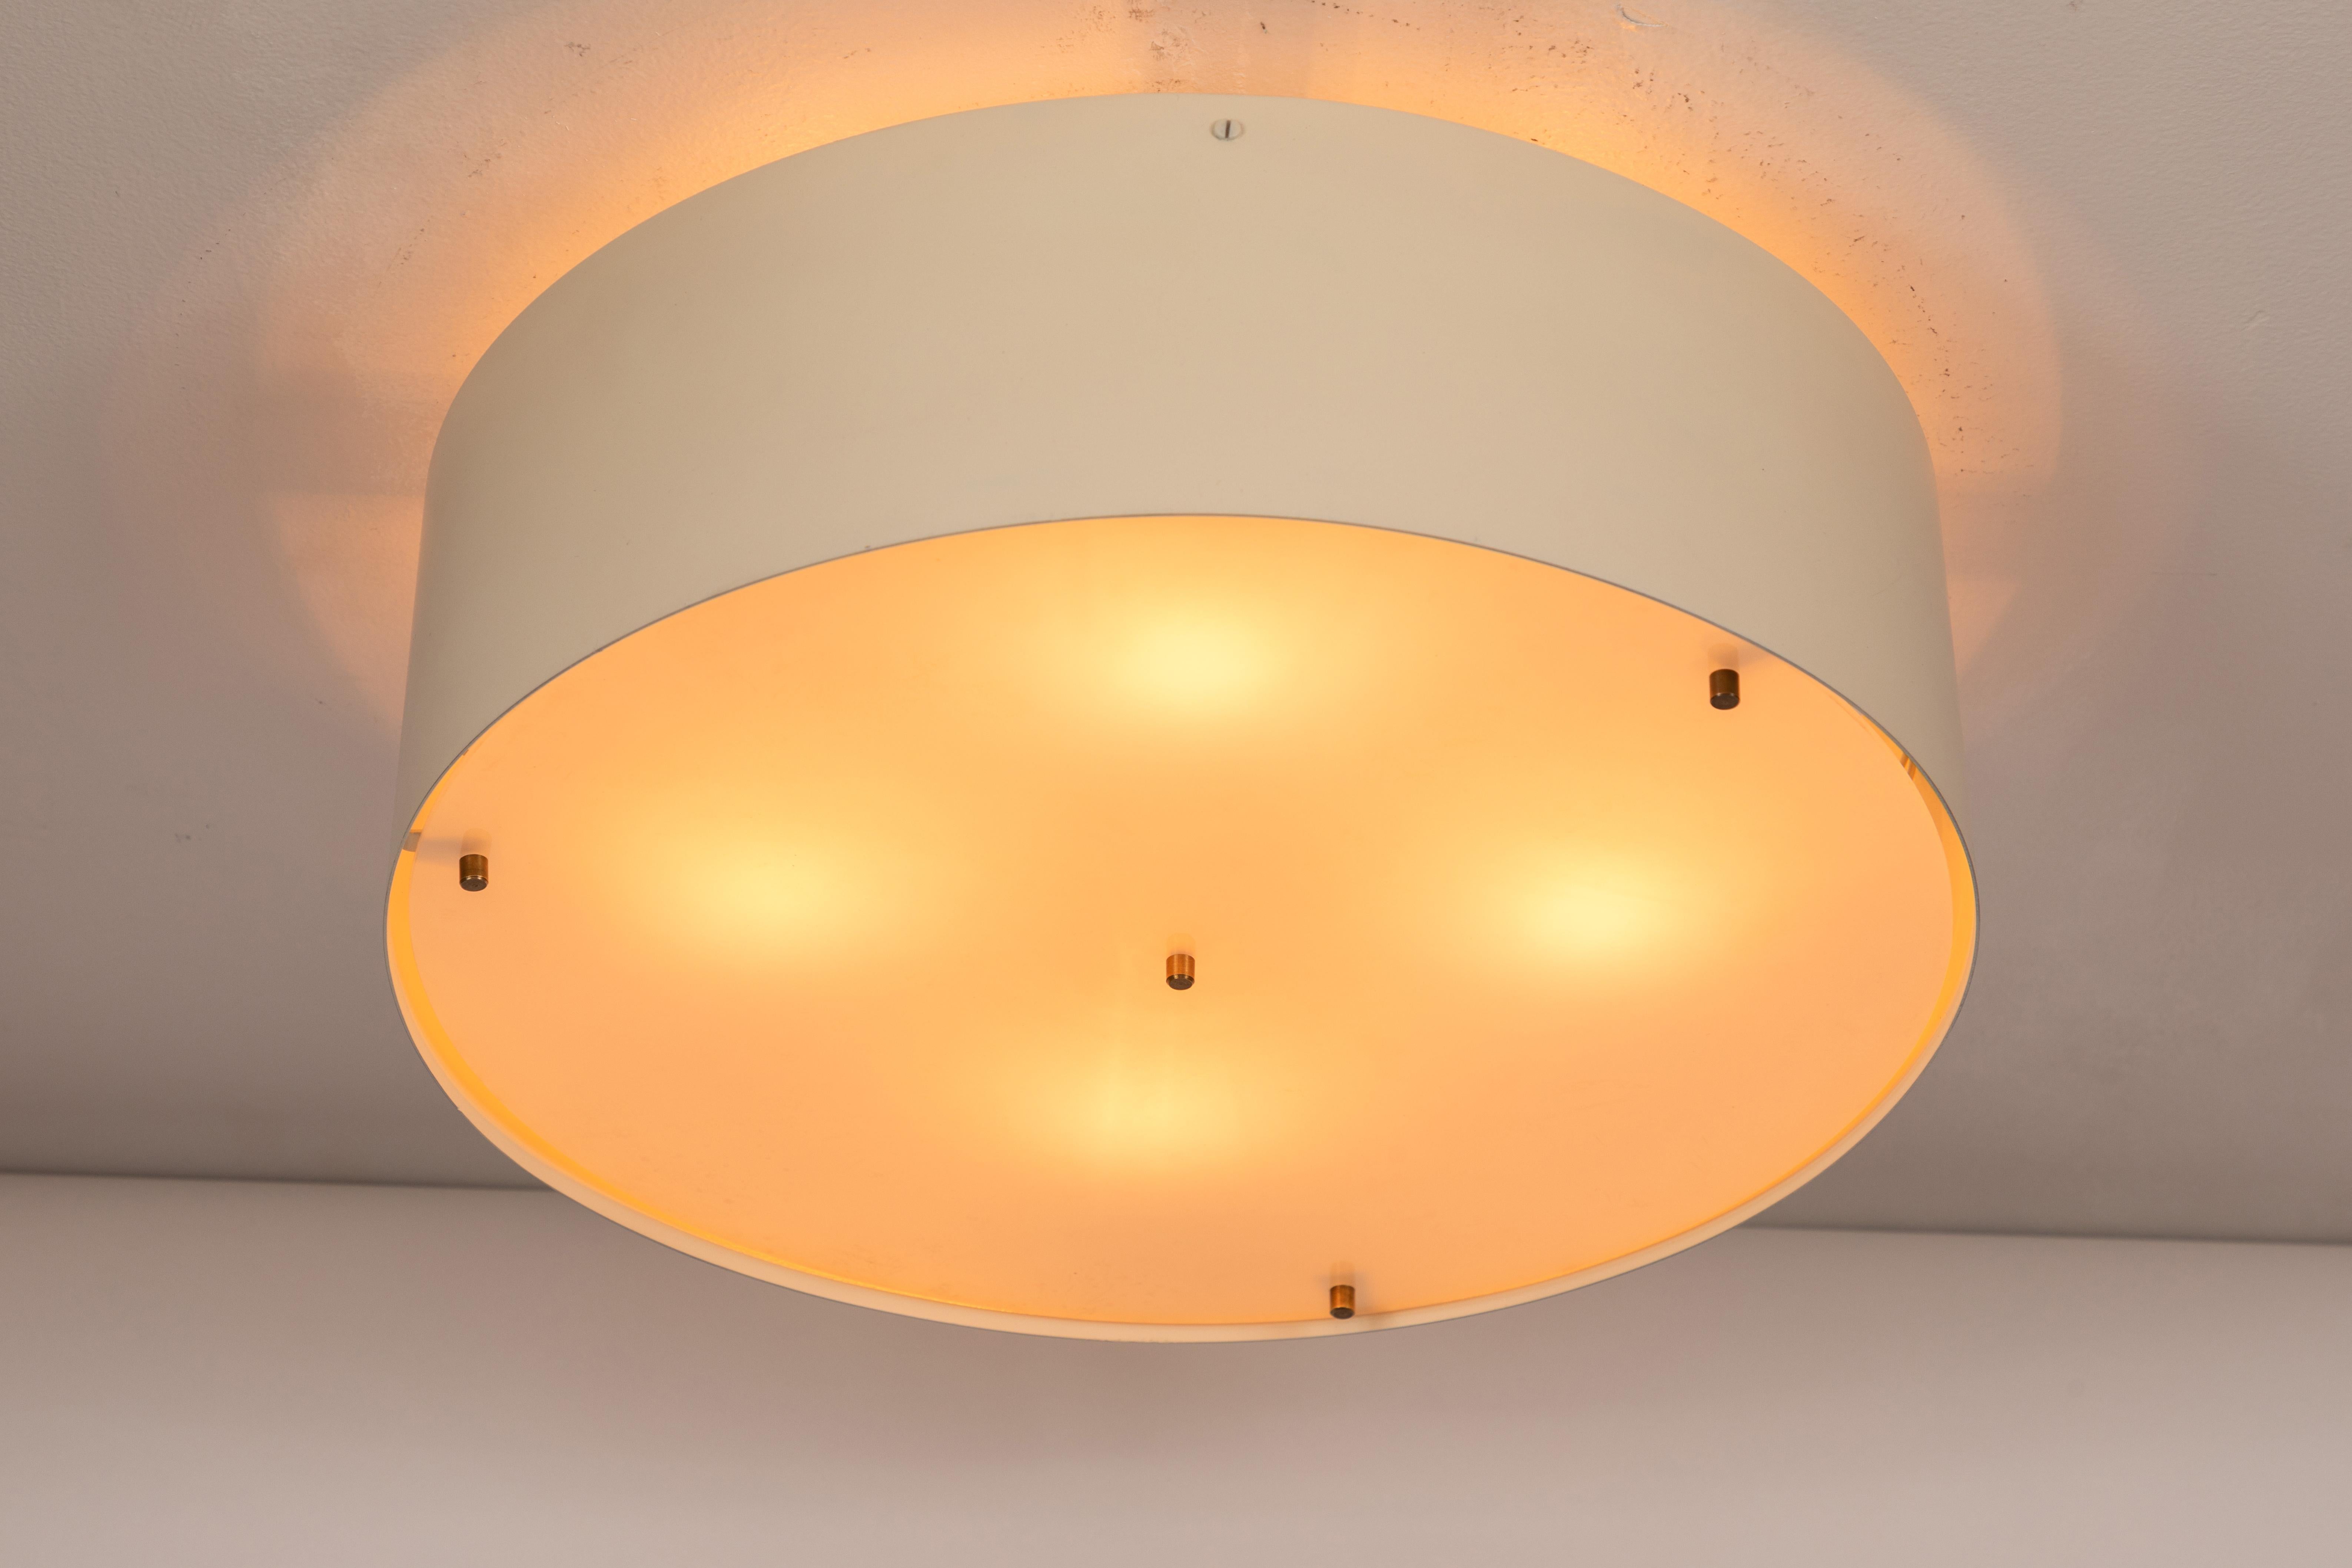 1950s Jacques Biny ceiling light for Luminalite. Executed in painted aluminum with opaque diffuser and brass decorative screws for Luminalite, France.

Professionally rewired for US electrical. Accommodates 4x 25W max US candelabra bulbs (higher